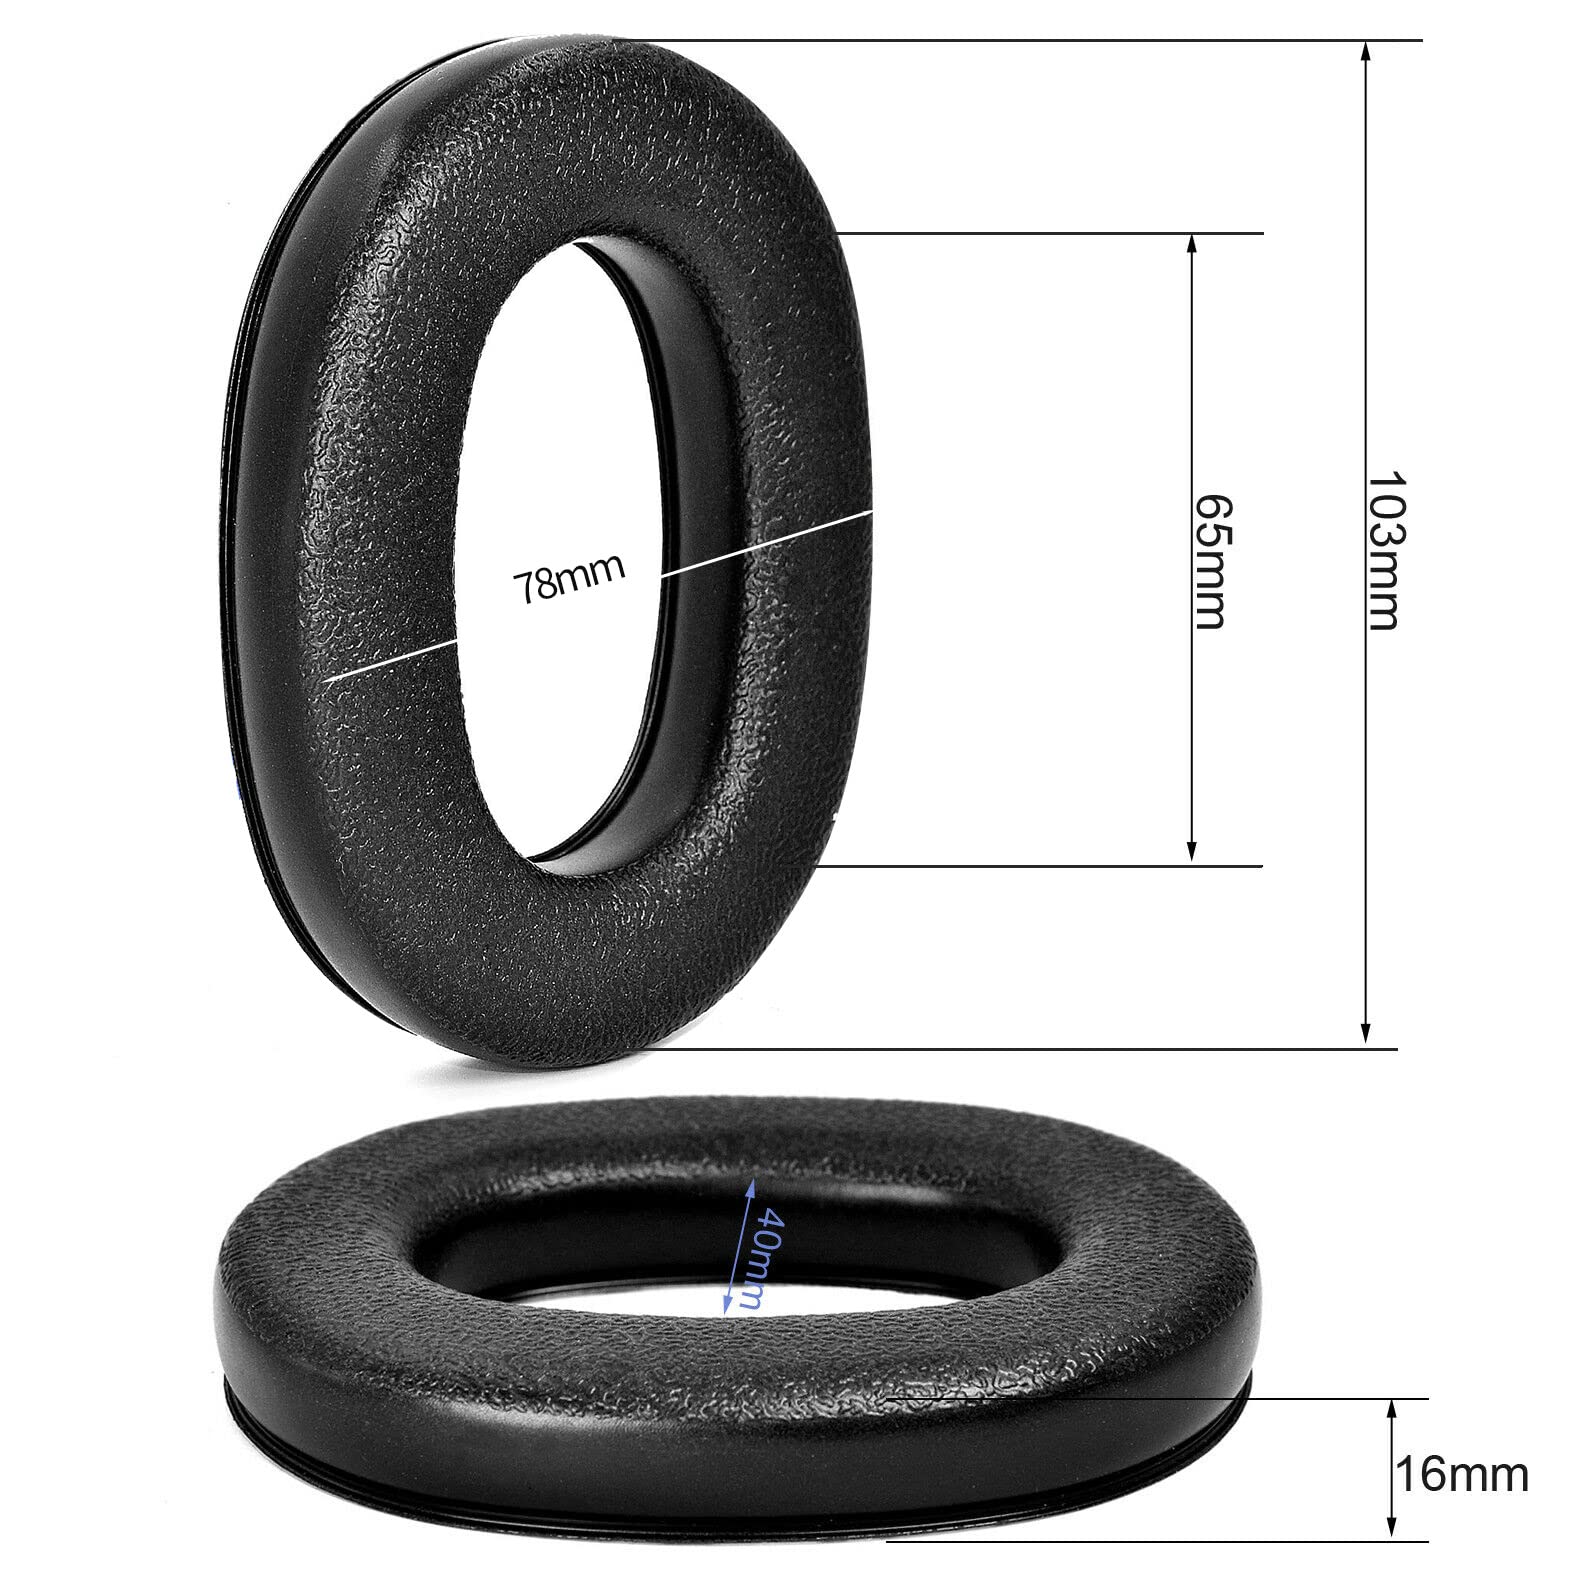 Ear Pads for 3M WorkTunes Connect Hearing Protector,1 Pair Ear Cushions Replacement (TPU)